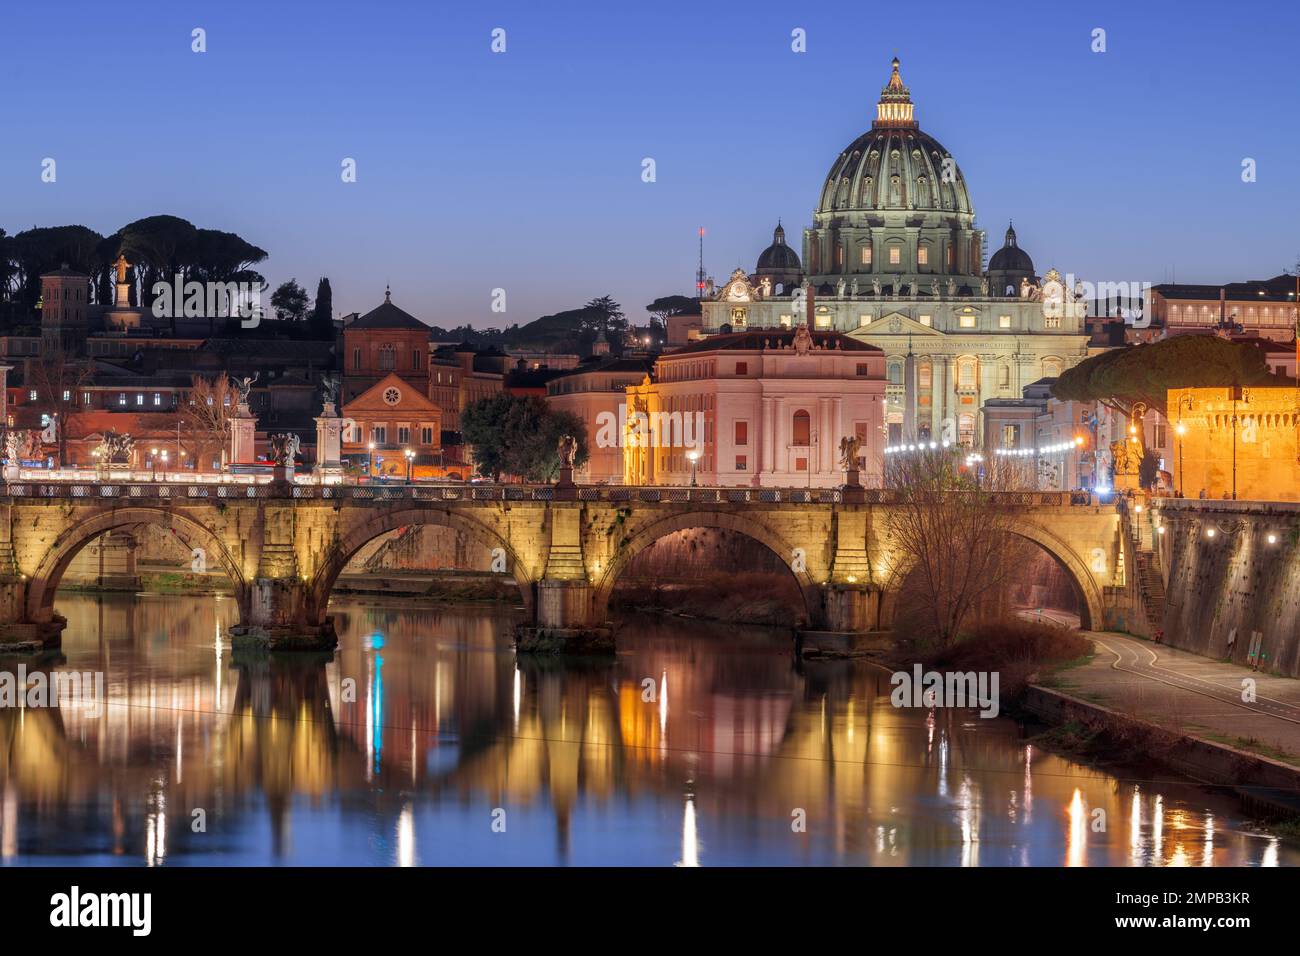 St. Peter's Basilica in Vatican City with the Tiber River passing through Rome, Italy at dusk. Stock Photo